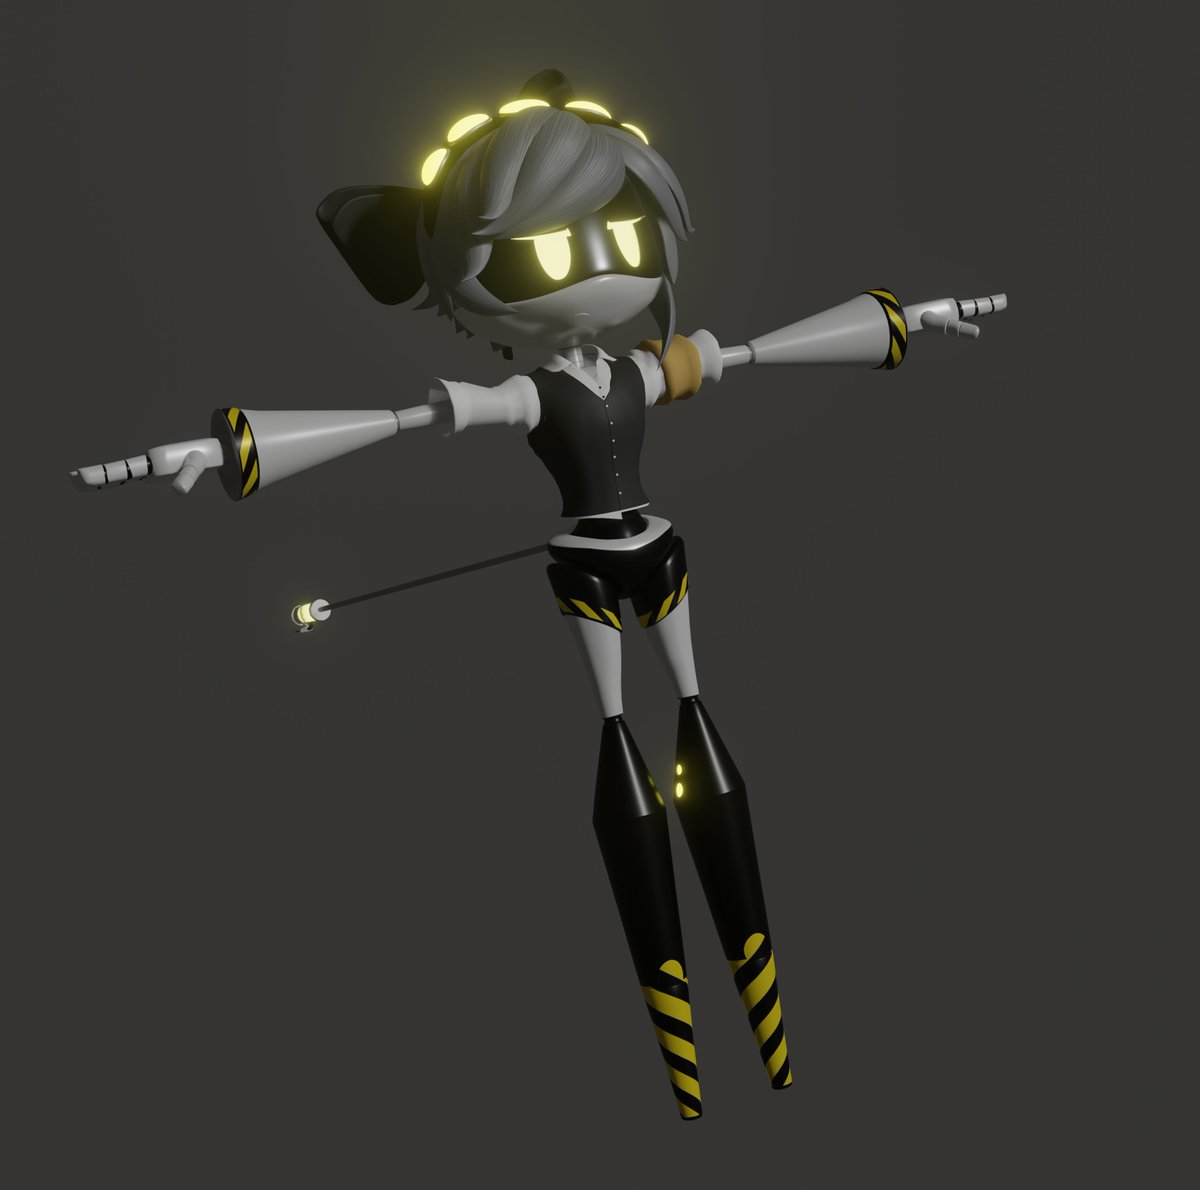 HERE IT IS!!!!!!!! TEX IIN THE *I C O N I C* MURDER DRONES (tm) T POSE!!!!!!!! NOW WITHOUT THE DEEPF RYING!!!!!!!!!!!!!!!!!!!!!!!! #murderdrones #glitchproductions